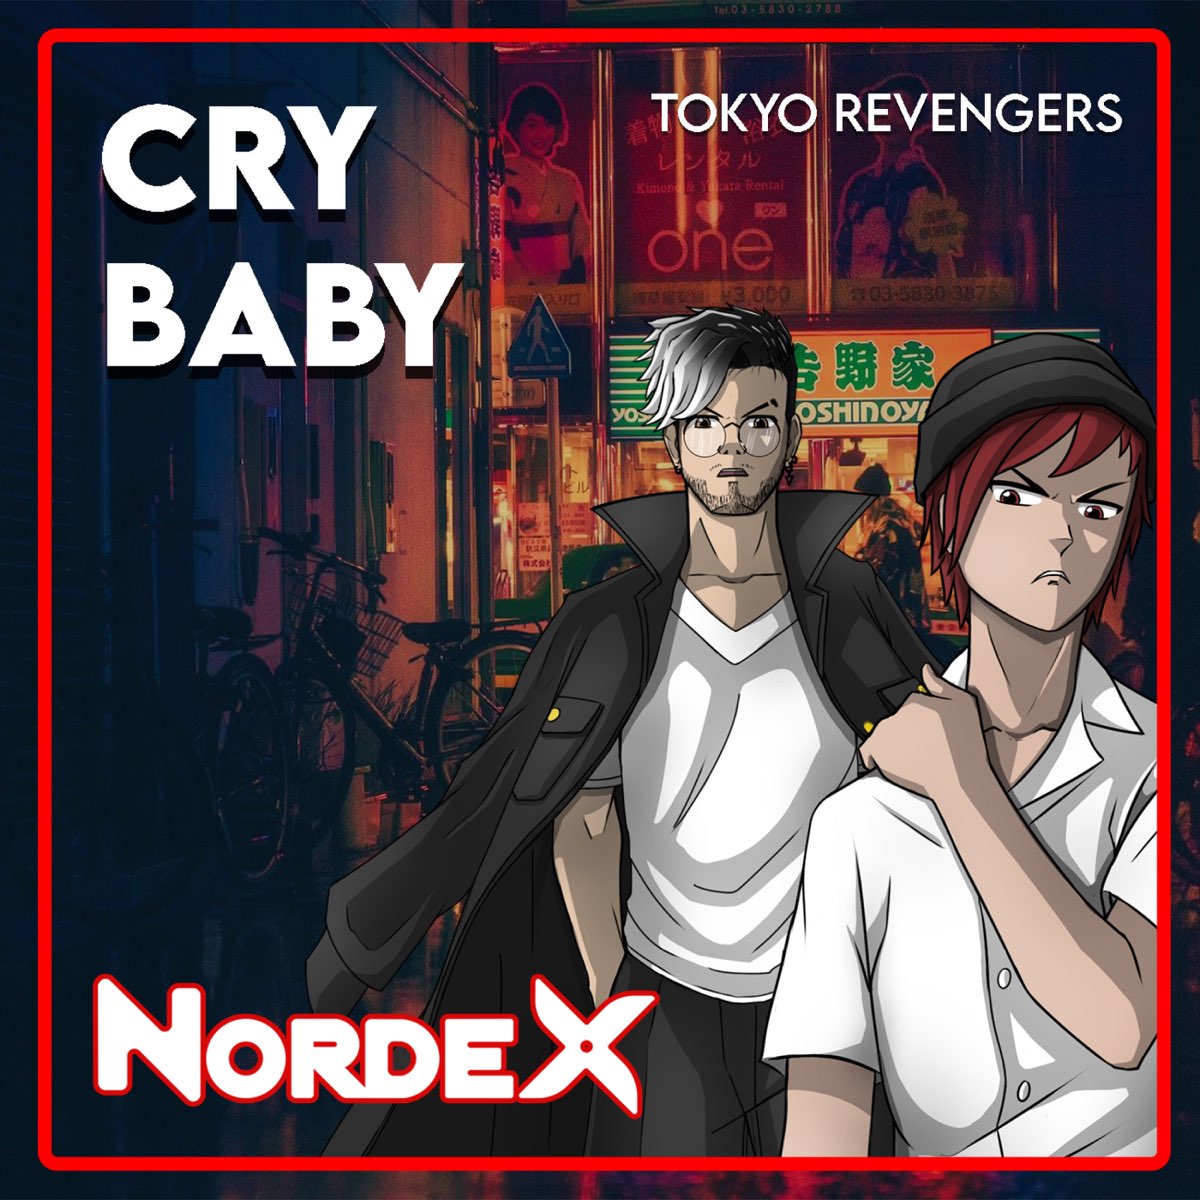 Cry baby tokyo. Cry Baby Tokyo Revengers. Cry Baby Tokyo Revengers текст. Cry Baby (from "Tokyo Revengers"). Official hige DANDISM - Cry Baby (Tokyo Revengers op).